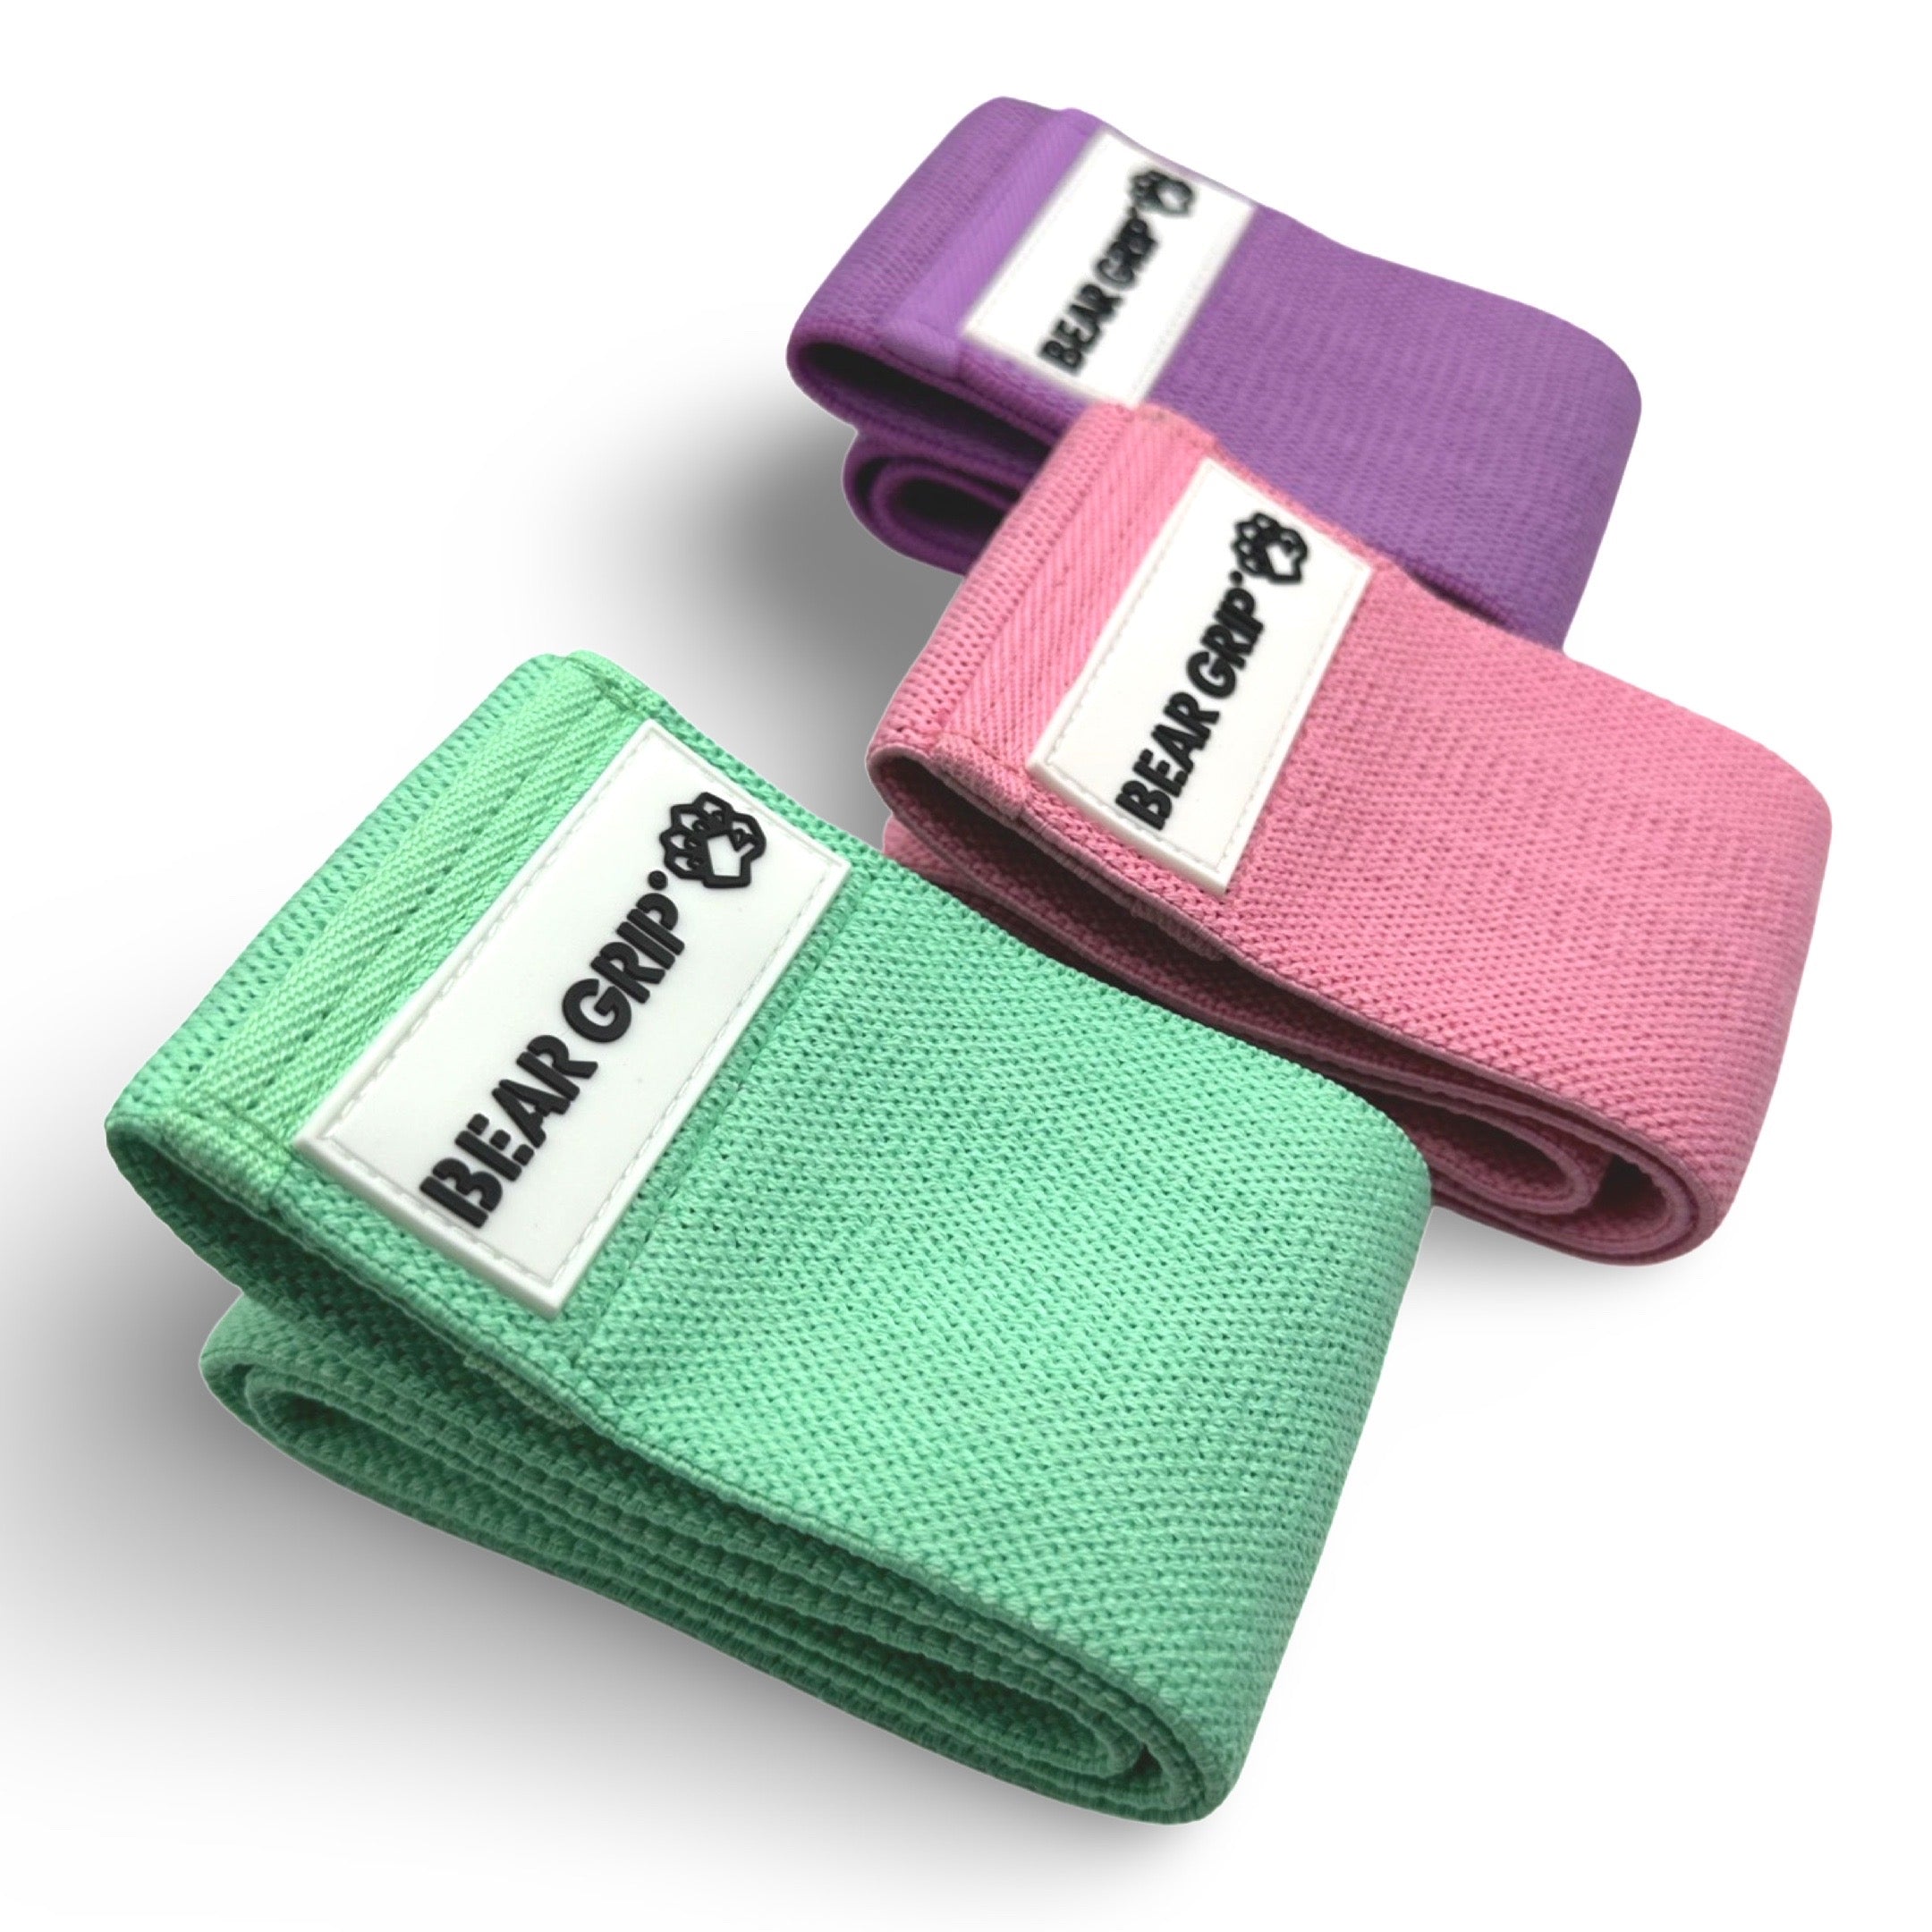 BEAR GRIP® SET OF 3 Glute Activation Band